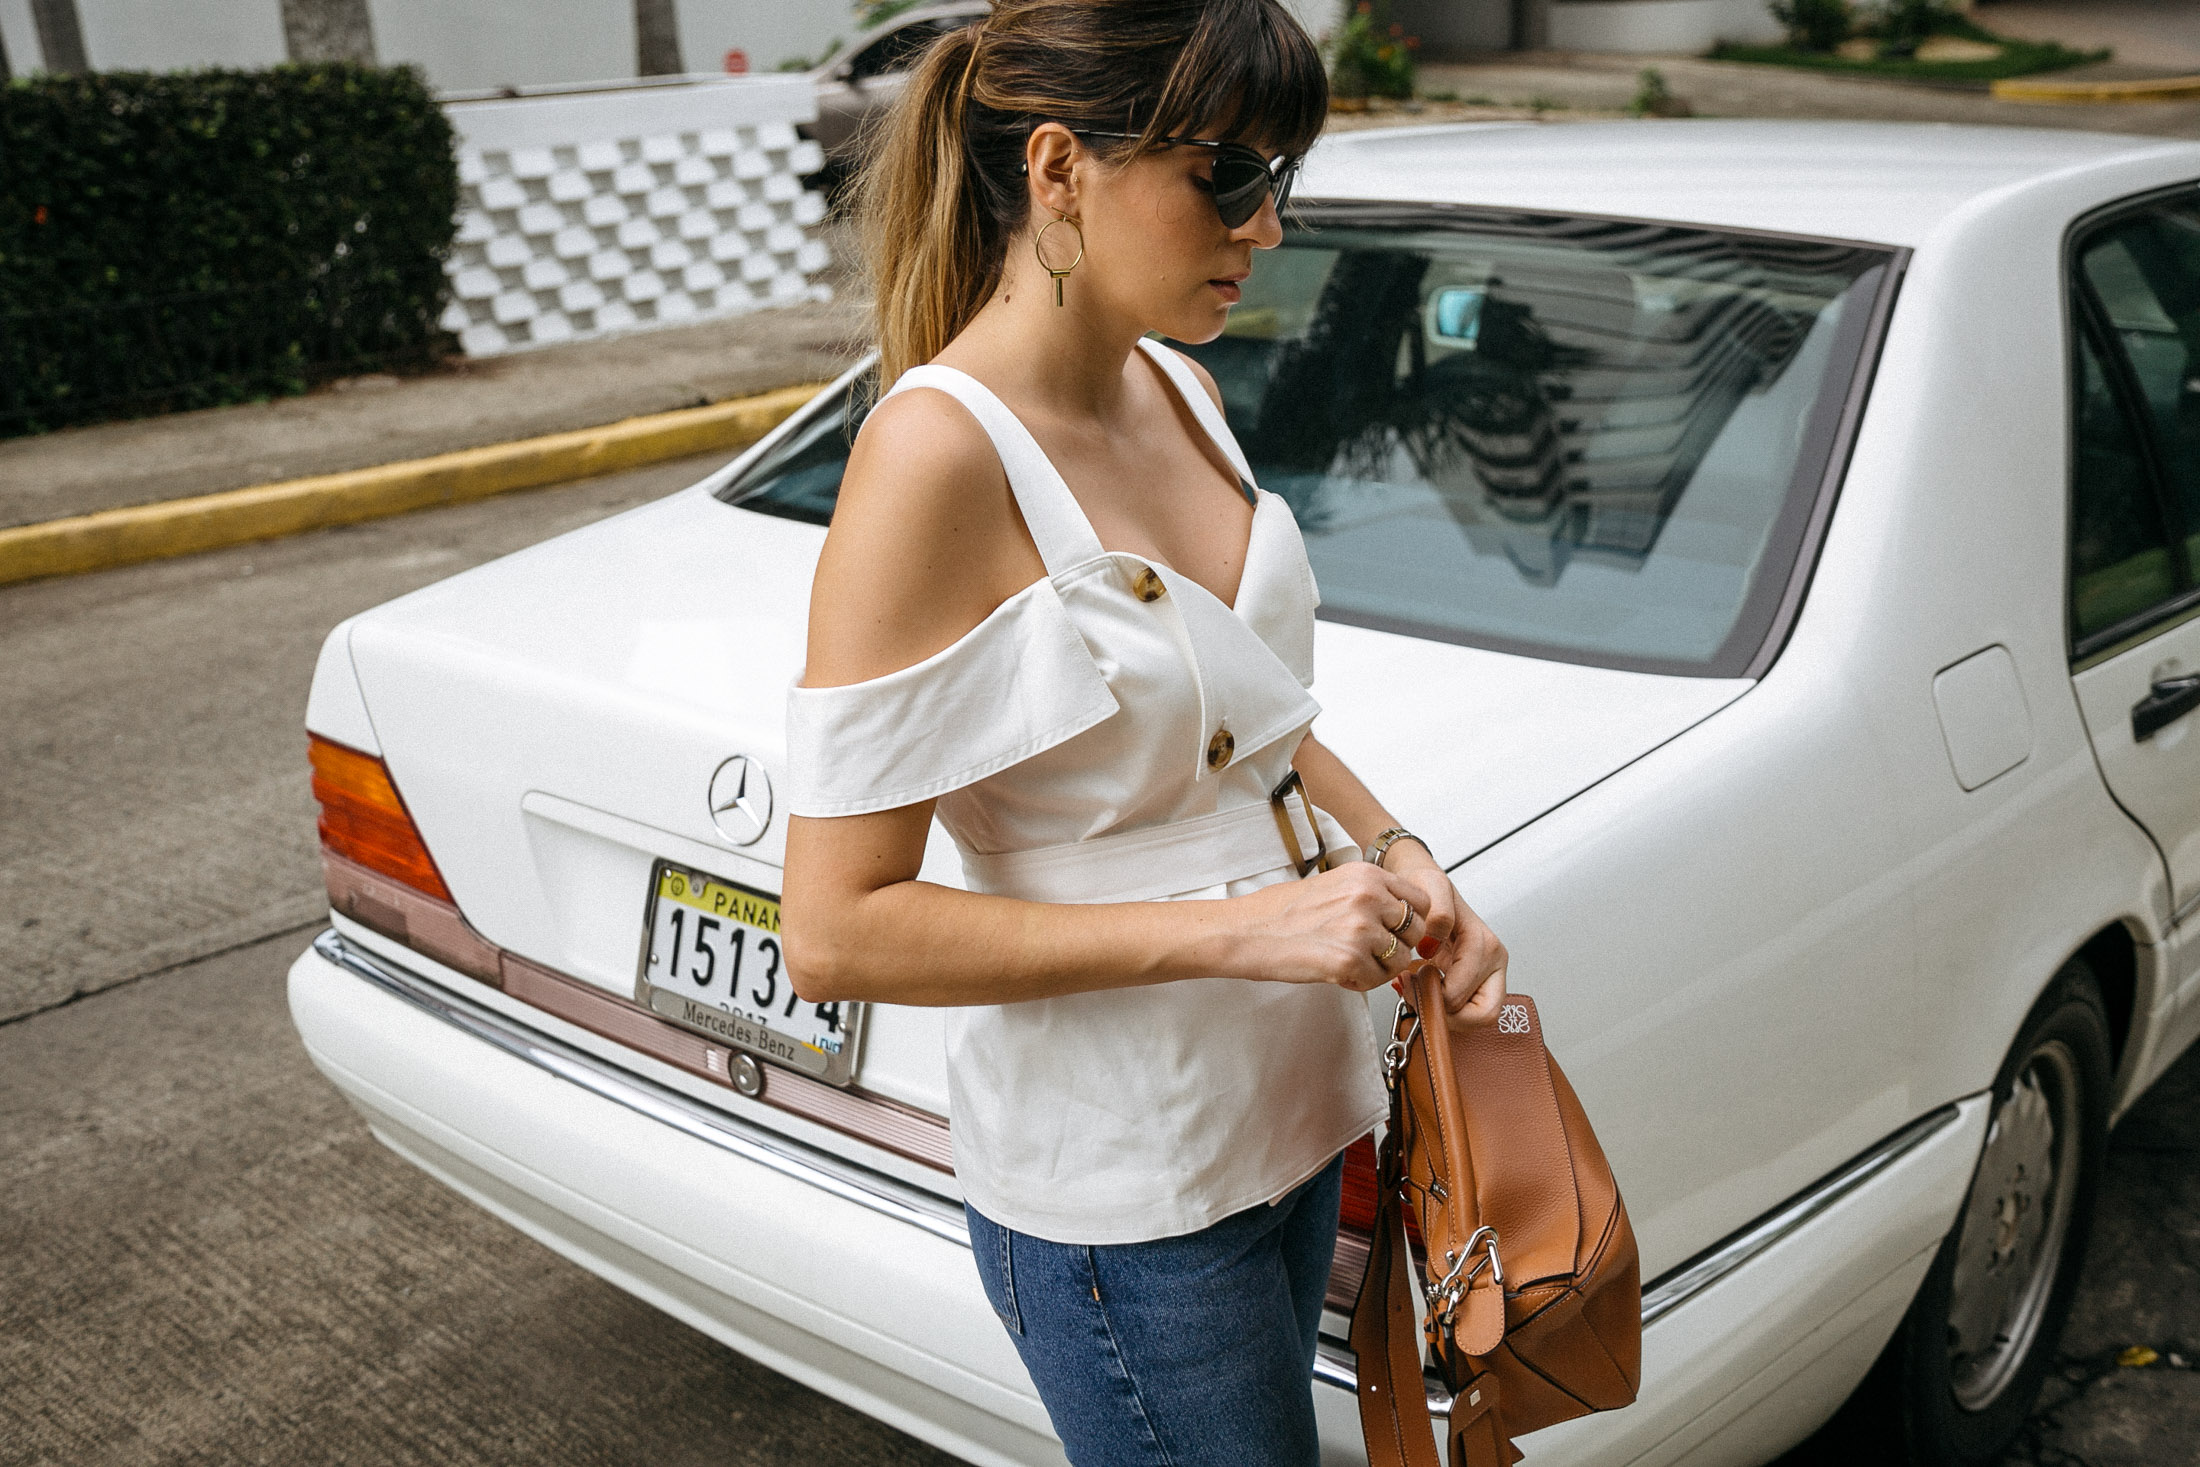 Maristella wears an off the shoulder white top from C/meo, jeans and a brown leather bag from Loewe